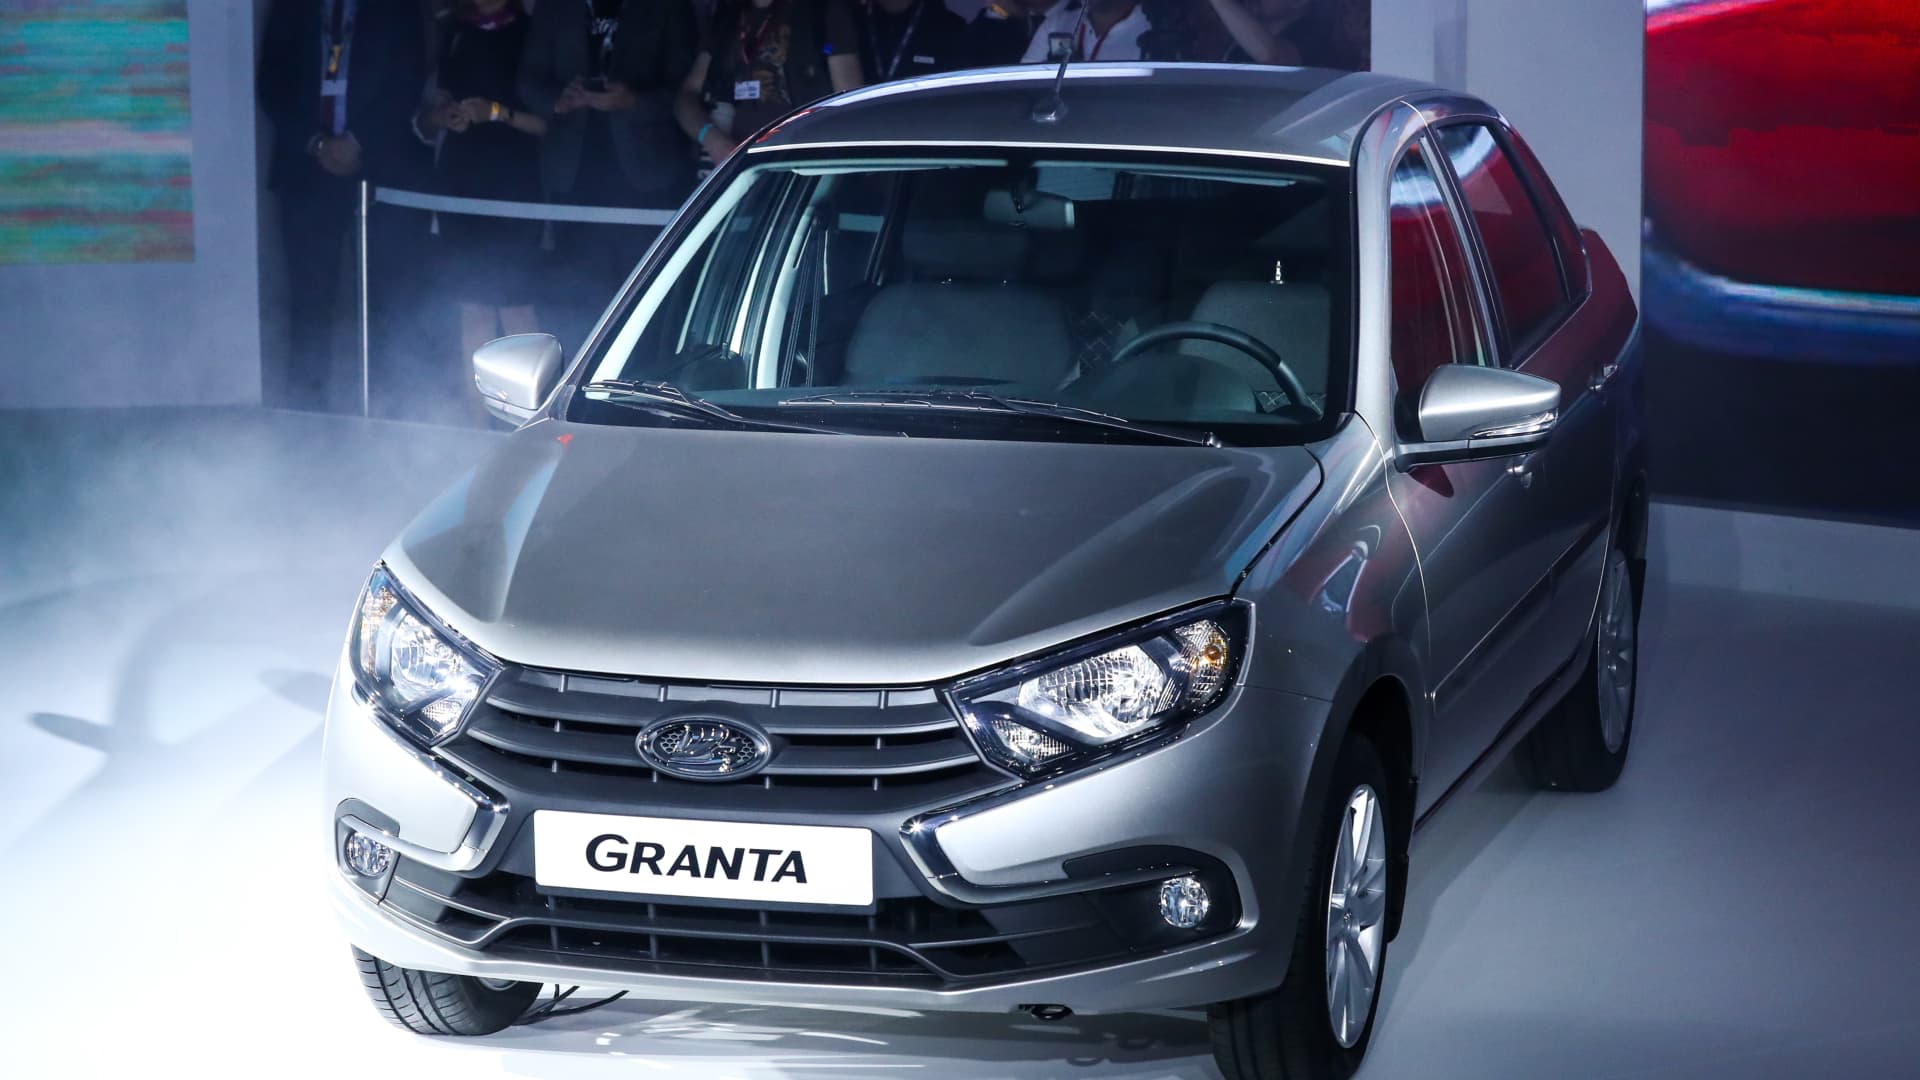 A Lada Granta car during the unveiling of new cars of the Lada Granta X-style series, Vesta Cross, XRAY Cross and Vesta Sport, at the 2018 Moscow International Motor Show at the Crocus Expo exhibition center.